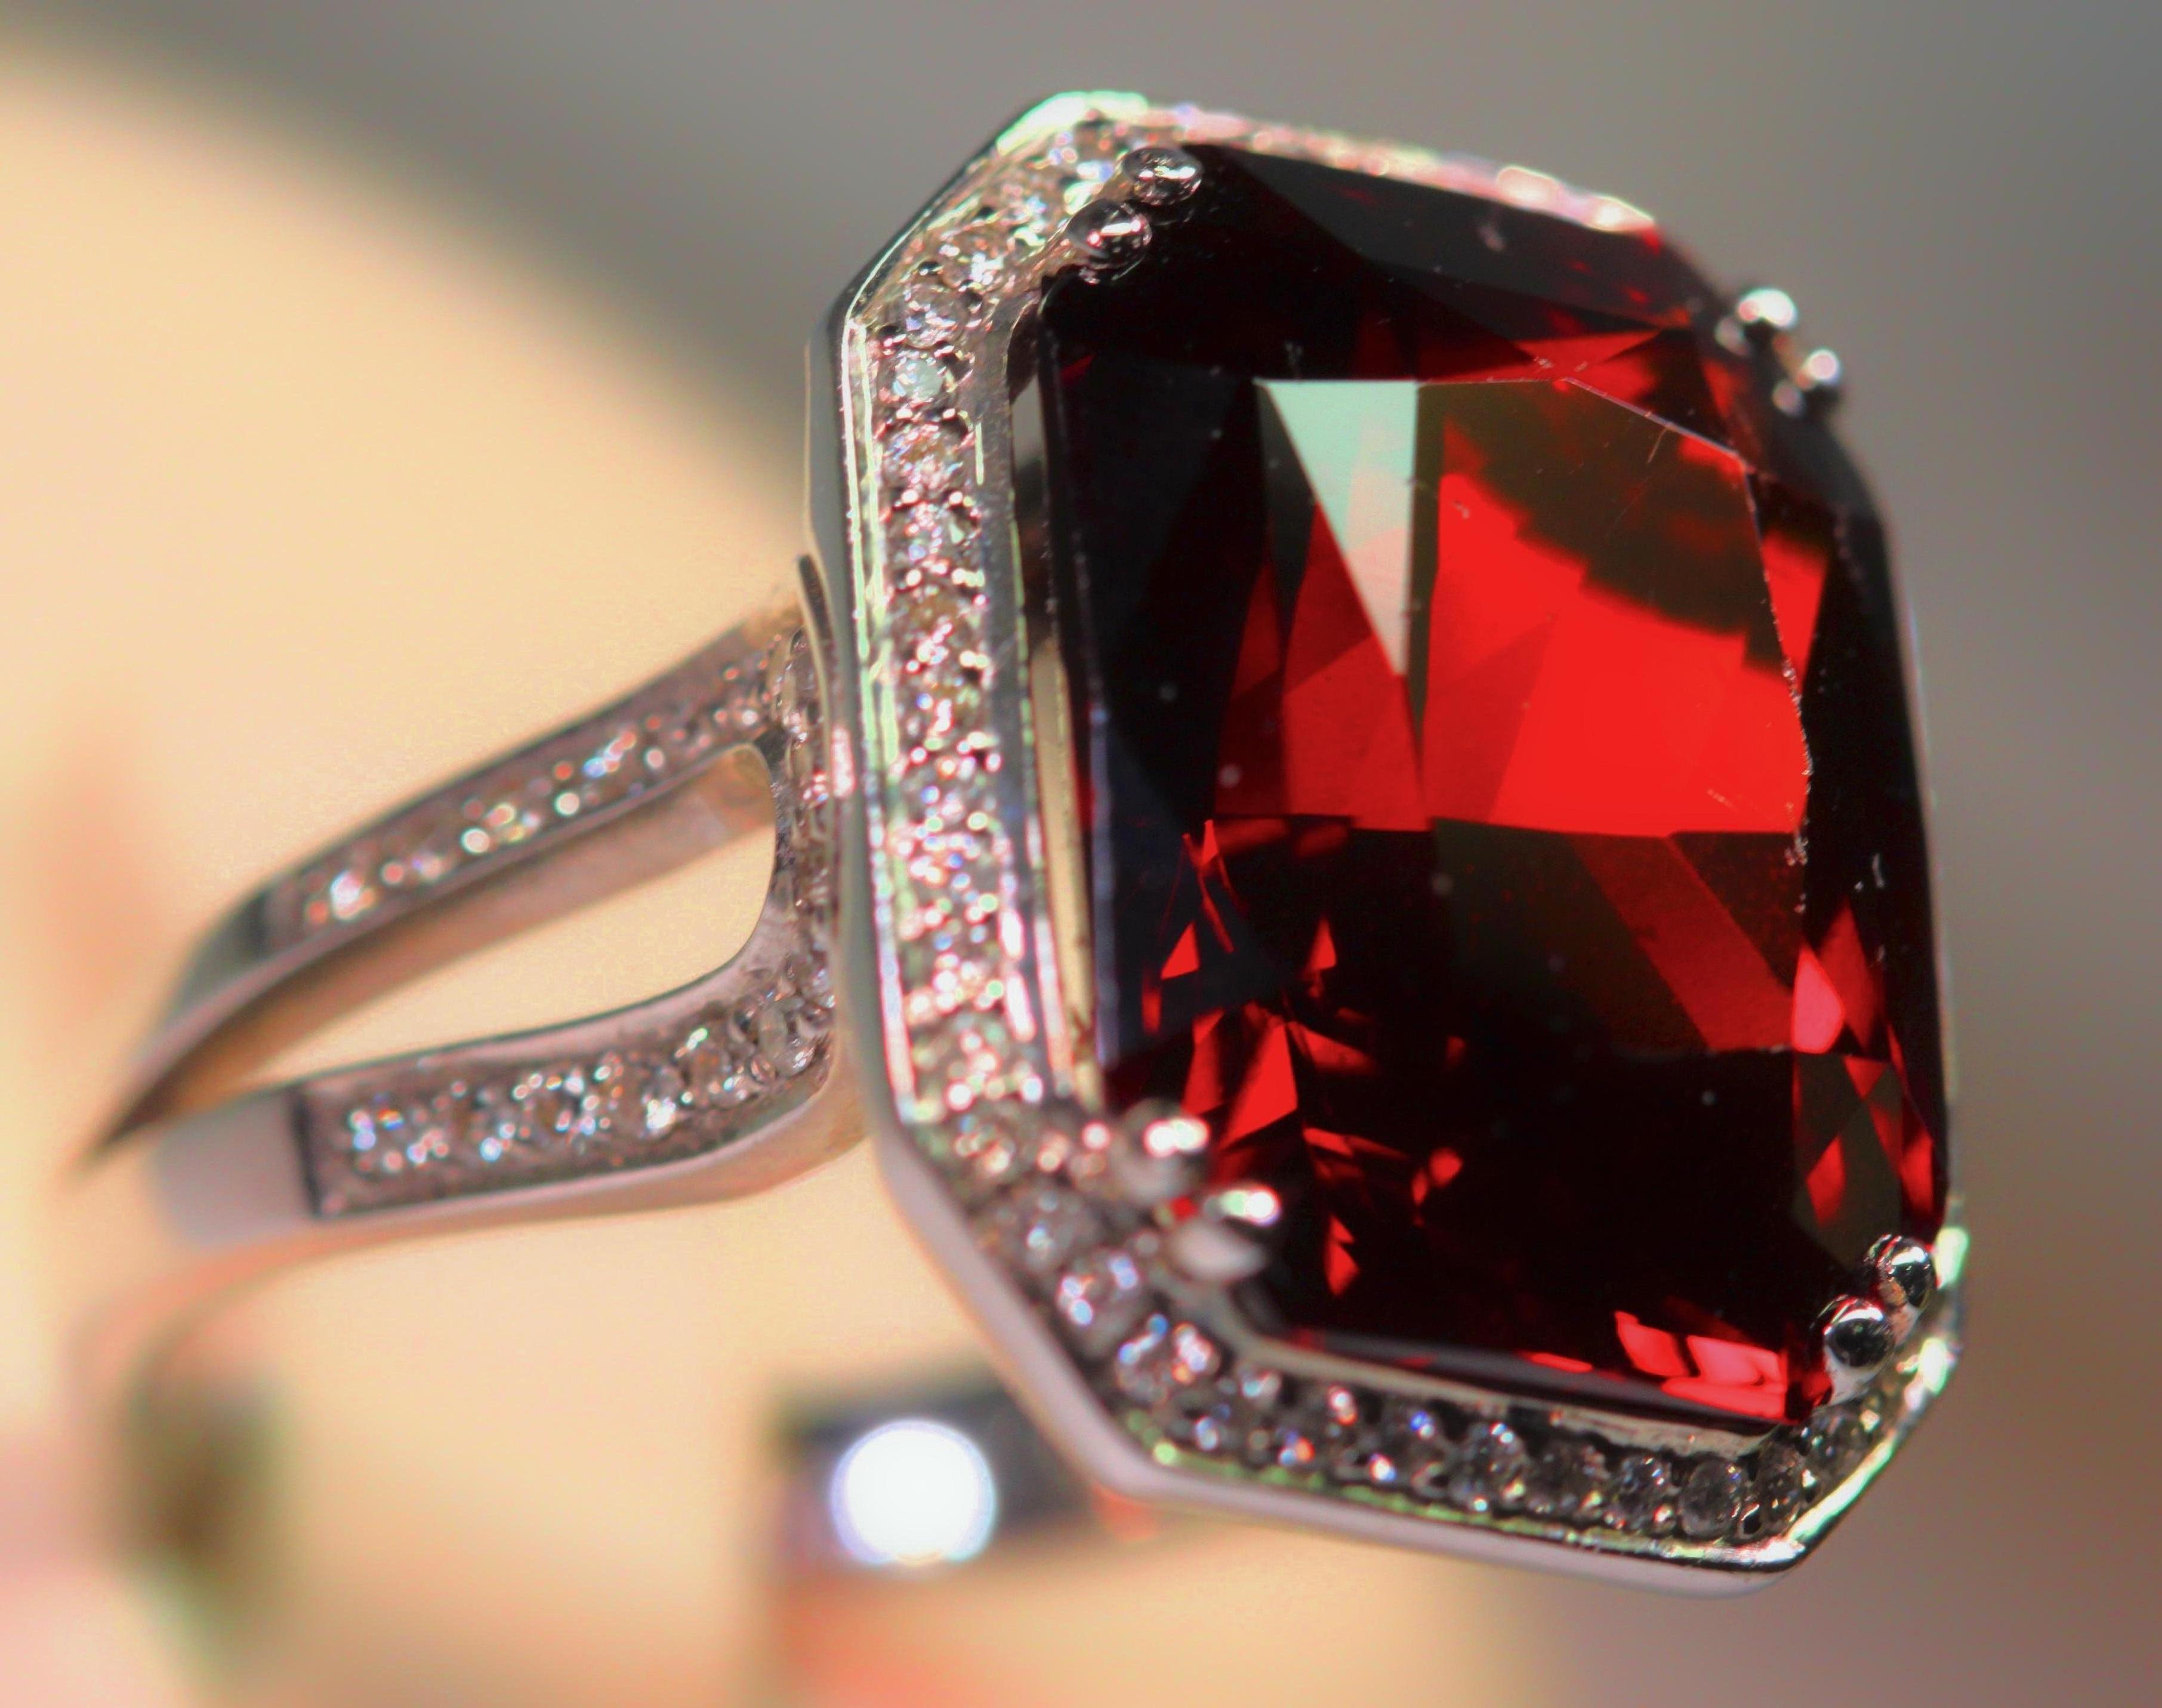 This is a phenomenal spessartite garnet, 18 karat white gold and diamond ring. The garnet's color is a bright rich red with slight brown under tones. The spessartite garnet is very lively with lots of flashing and it weighs 17.58 carats total